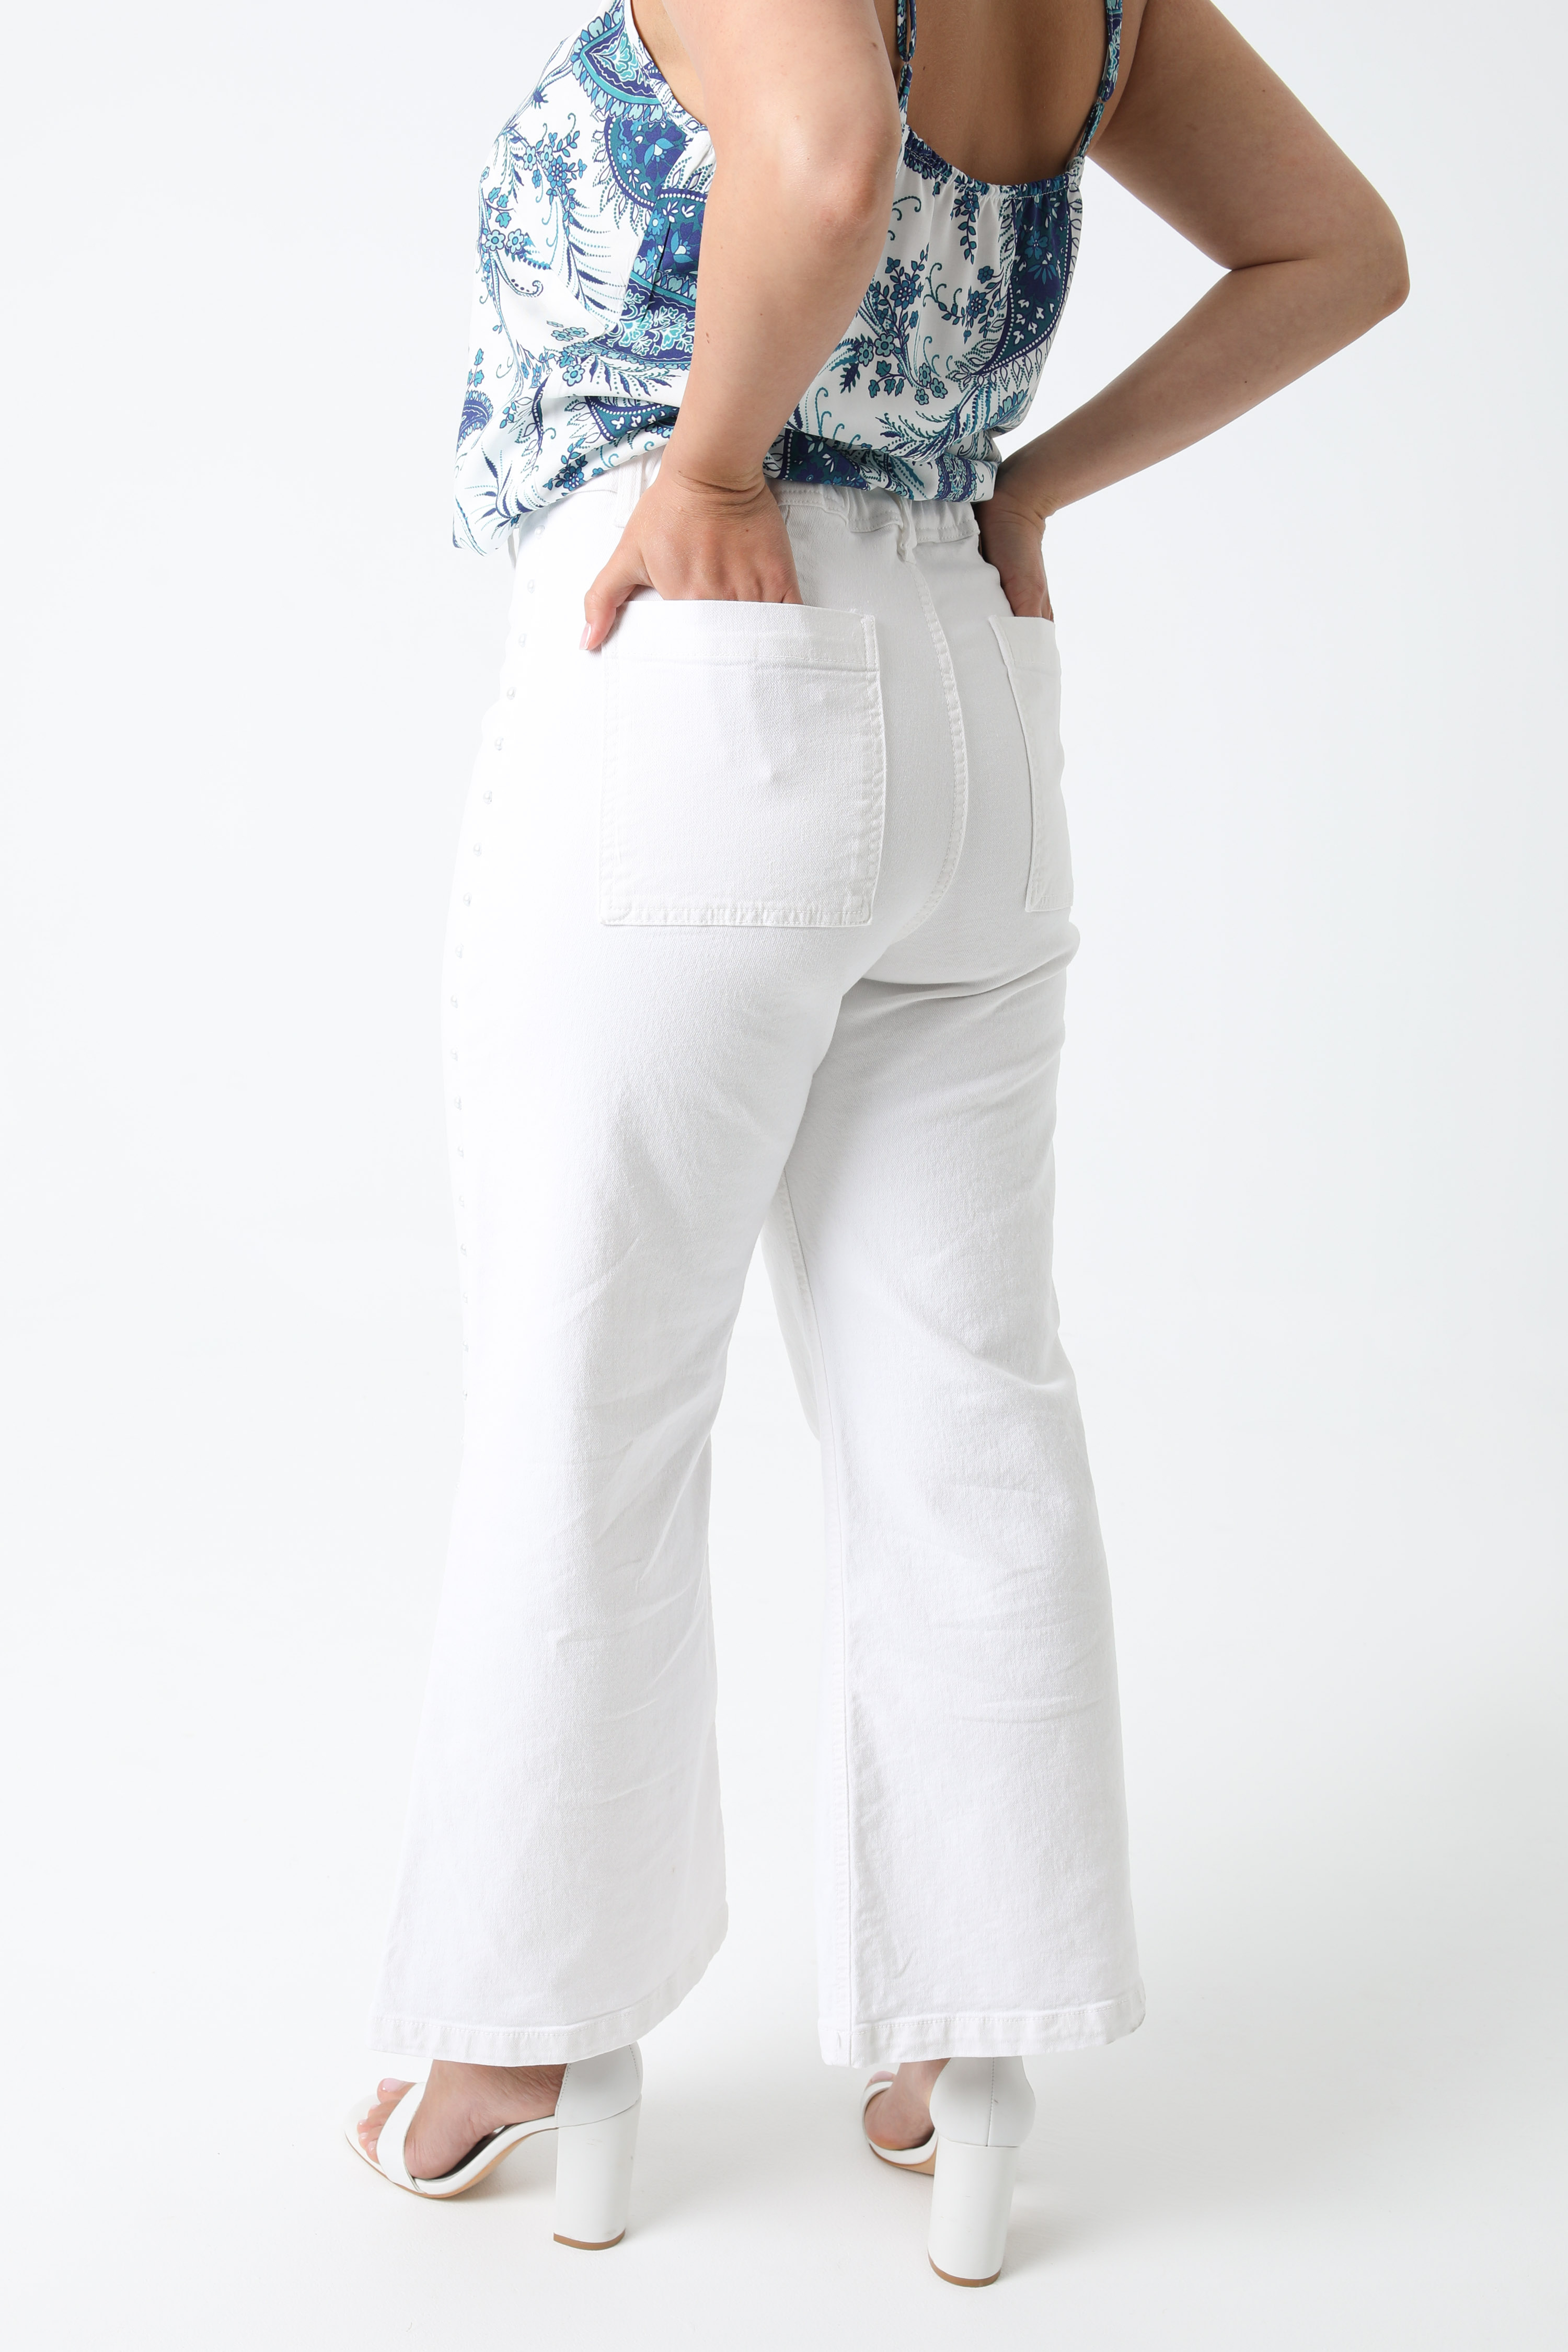 White jeans pants with pearls